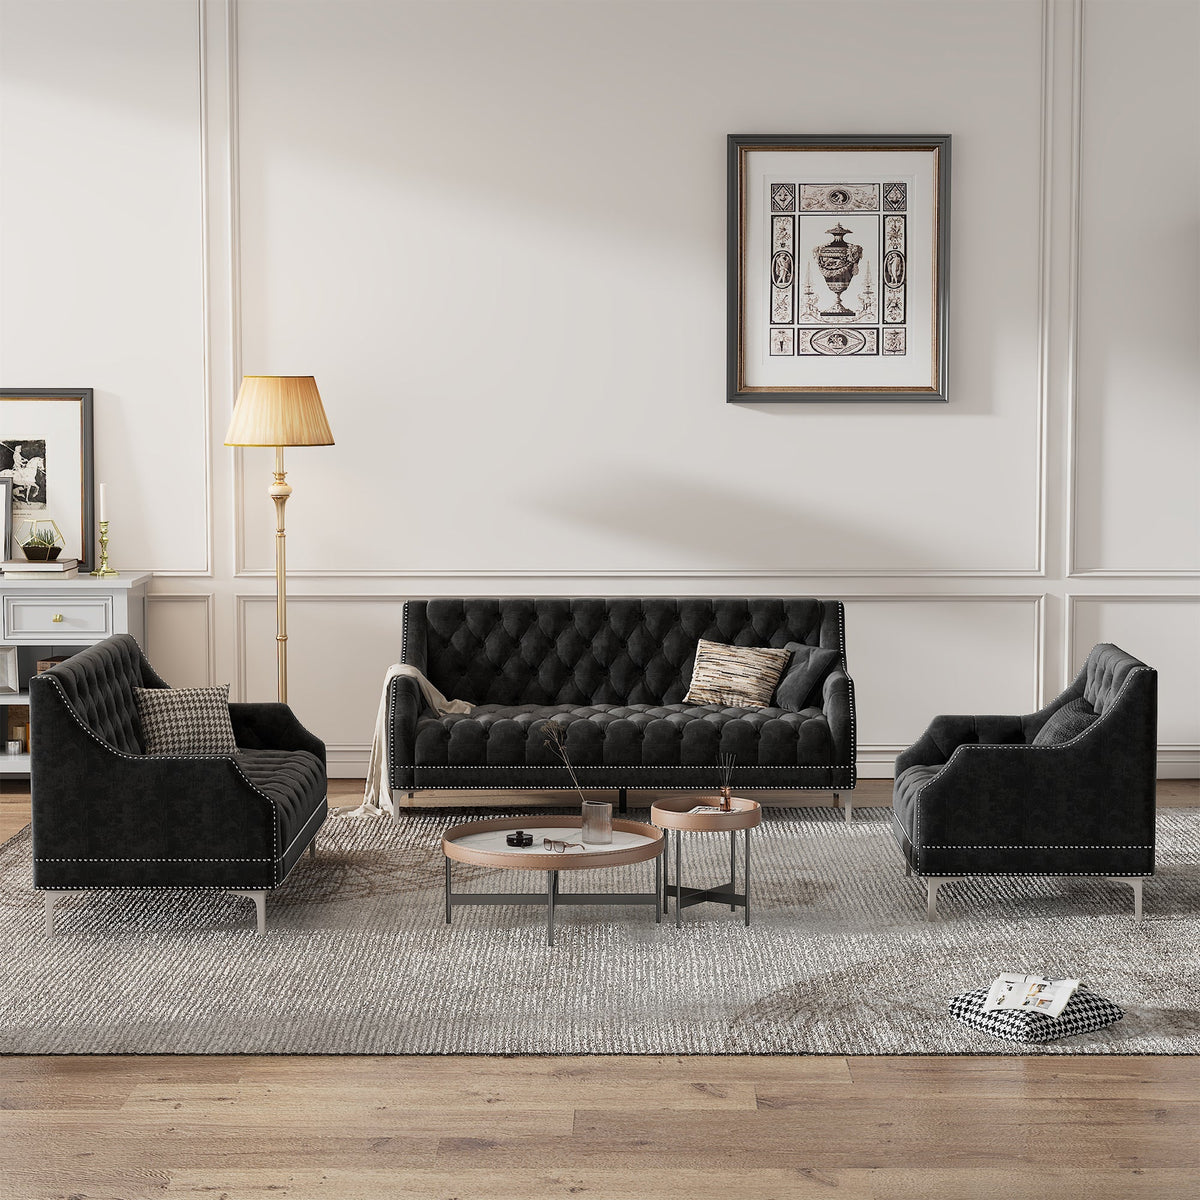 Modern three-piece sofa set with metal legs, buttoned tufted backrest,